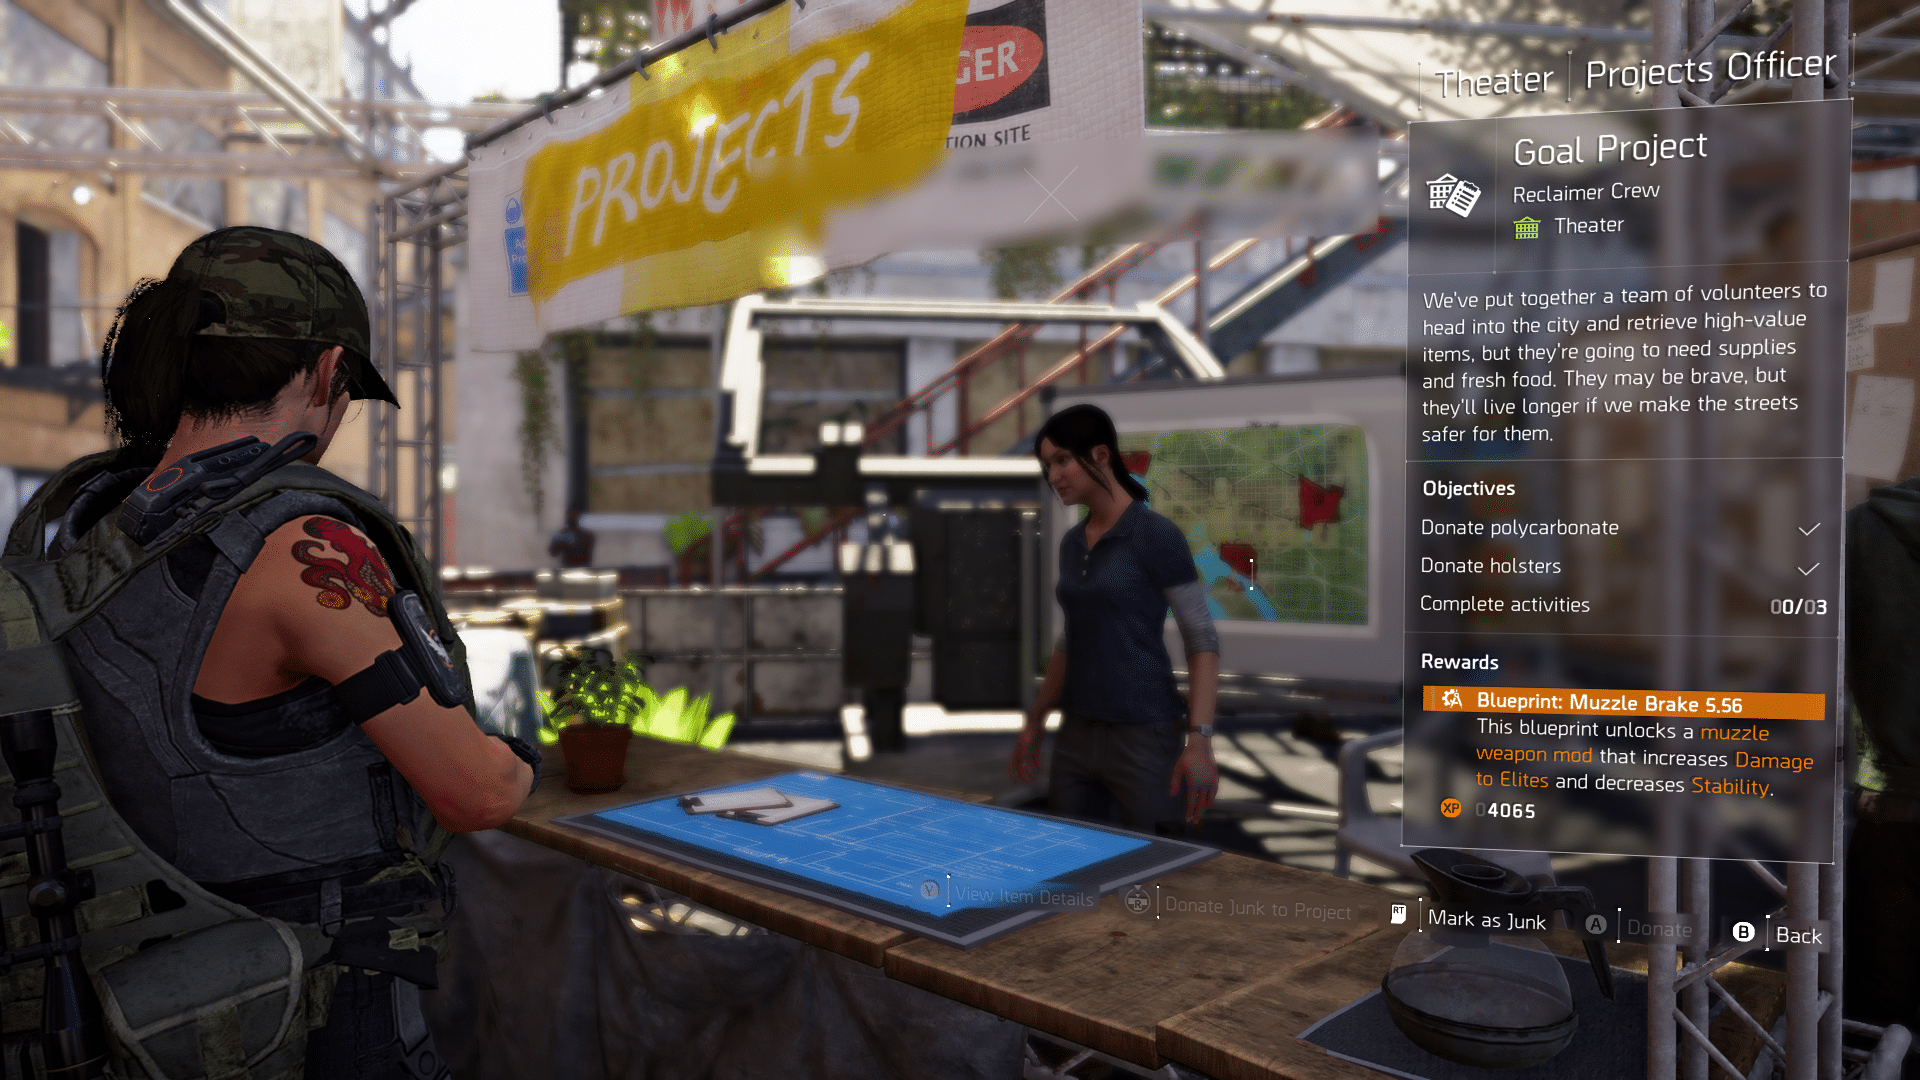 TheDivision2 3 25 2019 11 09 33 PM 341